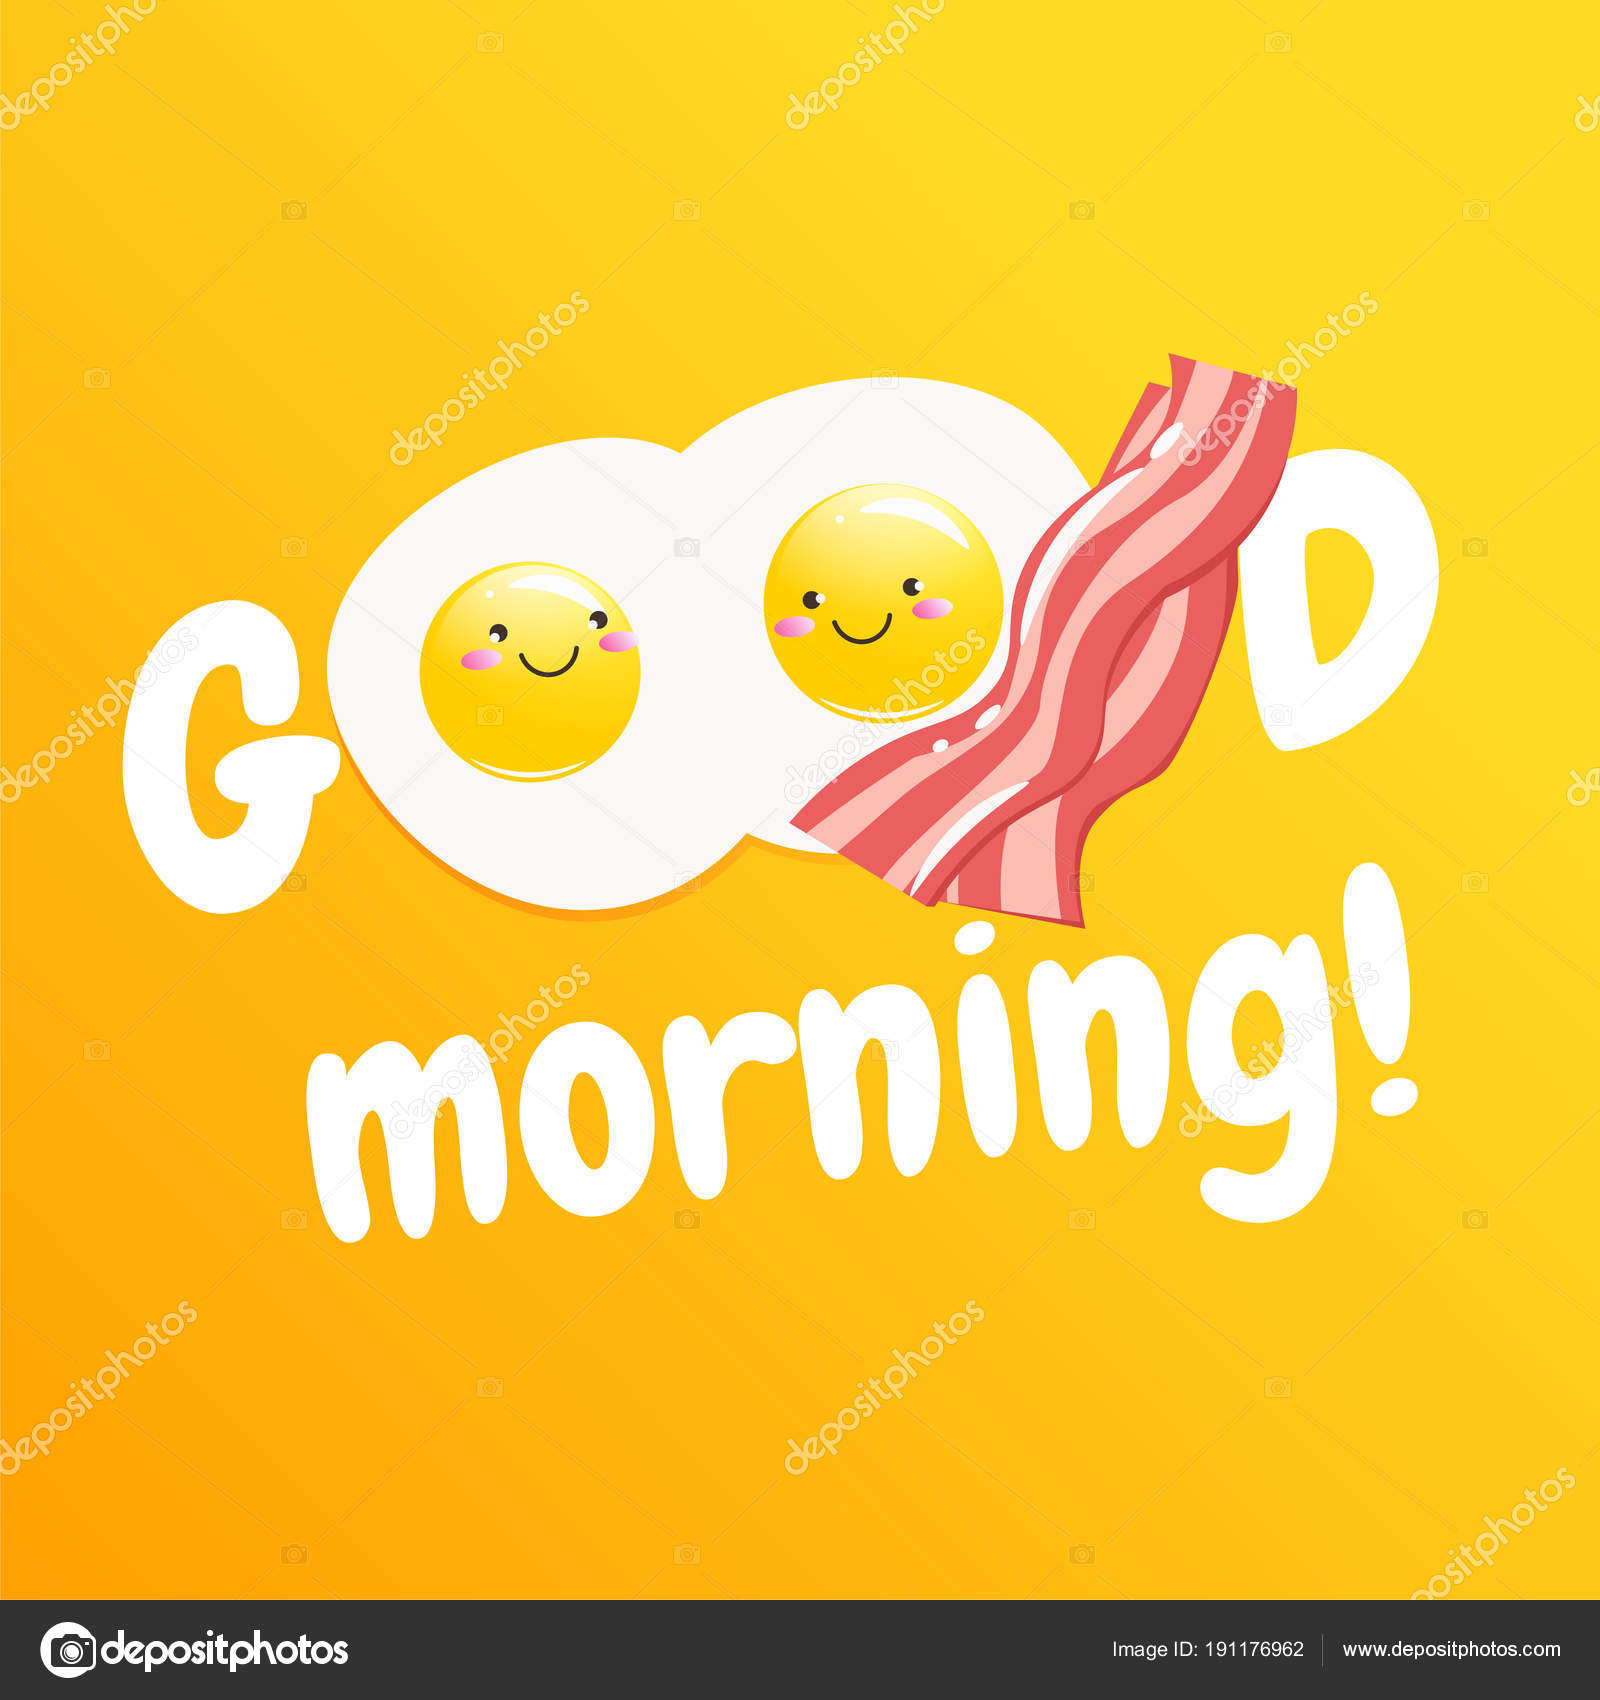 Good Morning Banner Classic Tasty Breakfast Of Scrambled Eggs And Bacon Vector Image By C Annetdebar Vector Stock